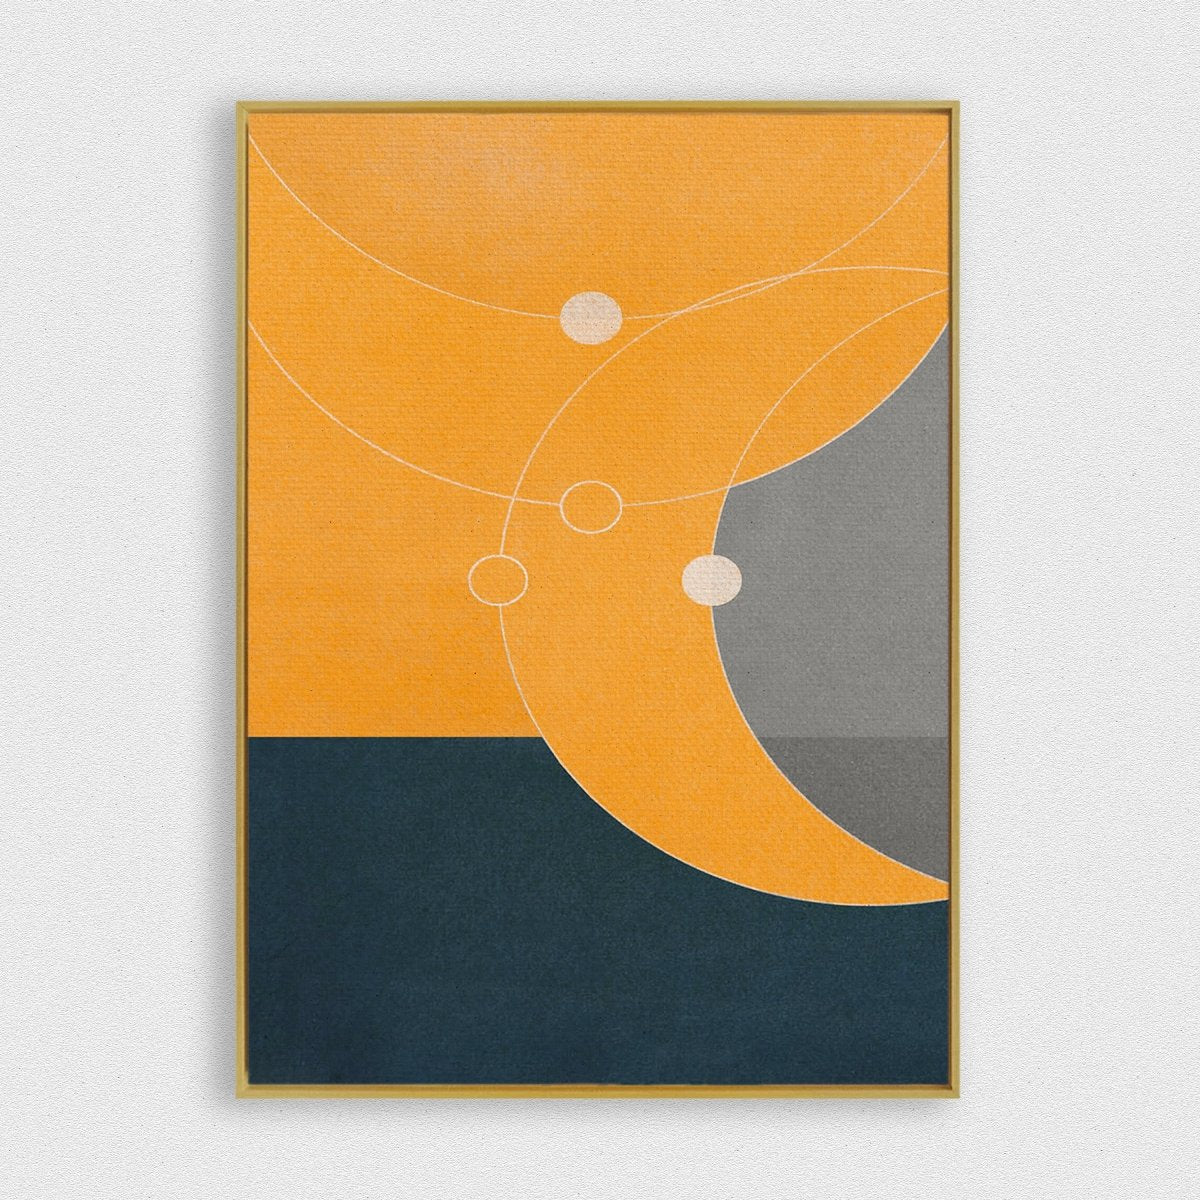 Orbiting 2 framed horizontal canvas wall art piece for sale at Vybe Interior